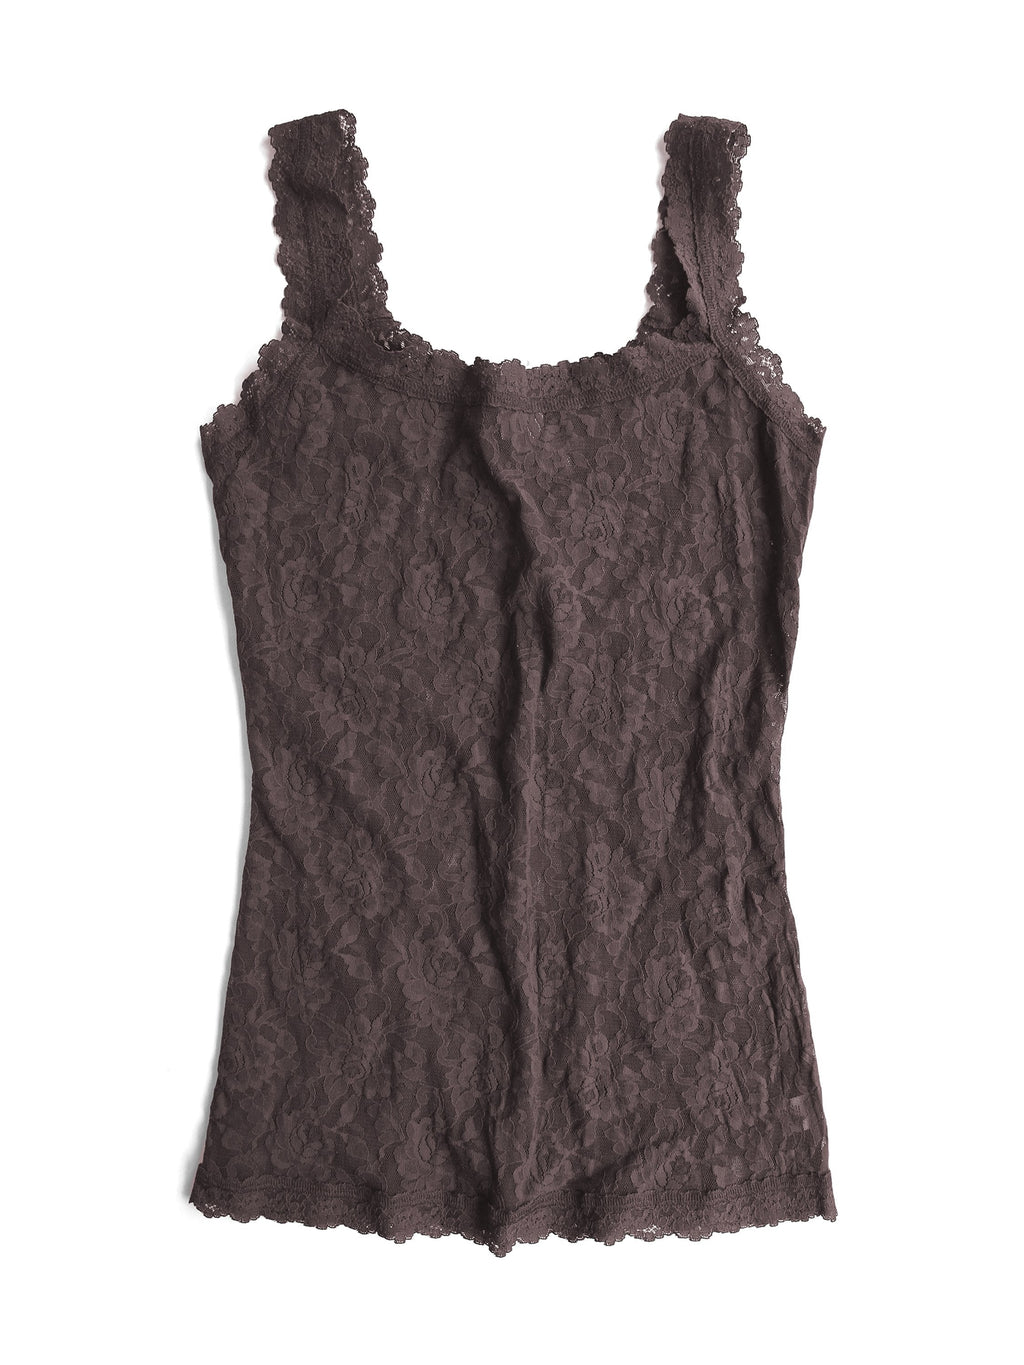 Hanky Panky Signature Lace Unlined Camisole (1390L)- Partly Cloudy